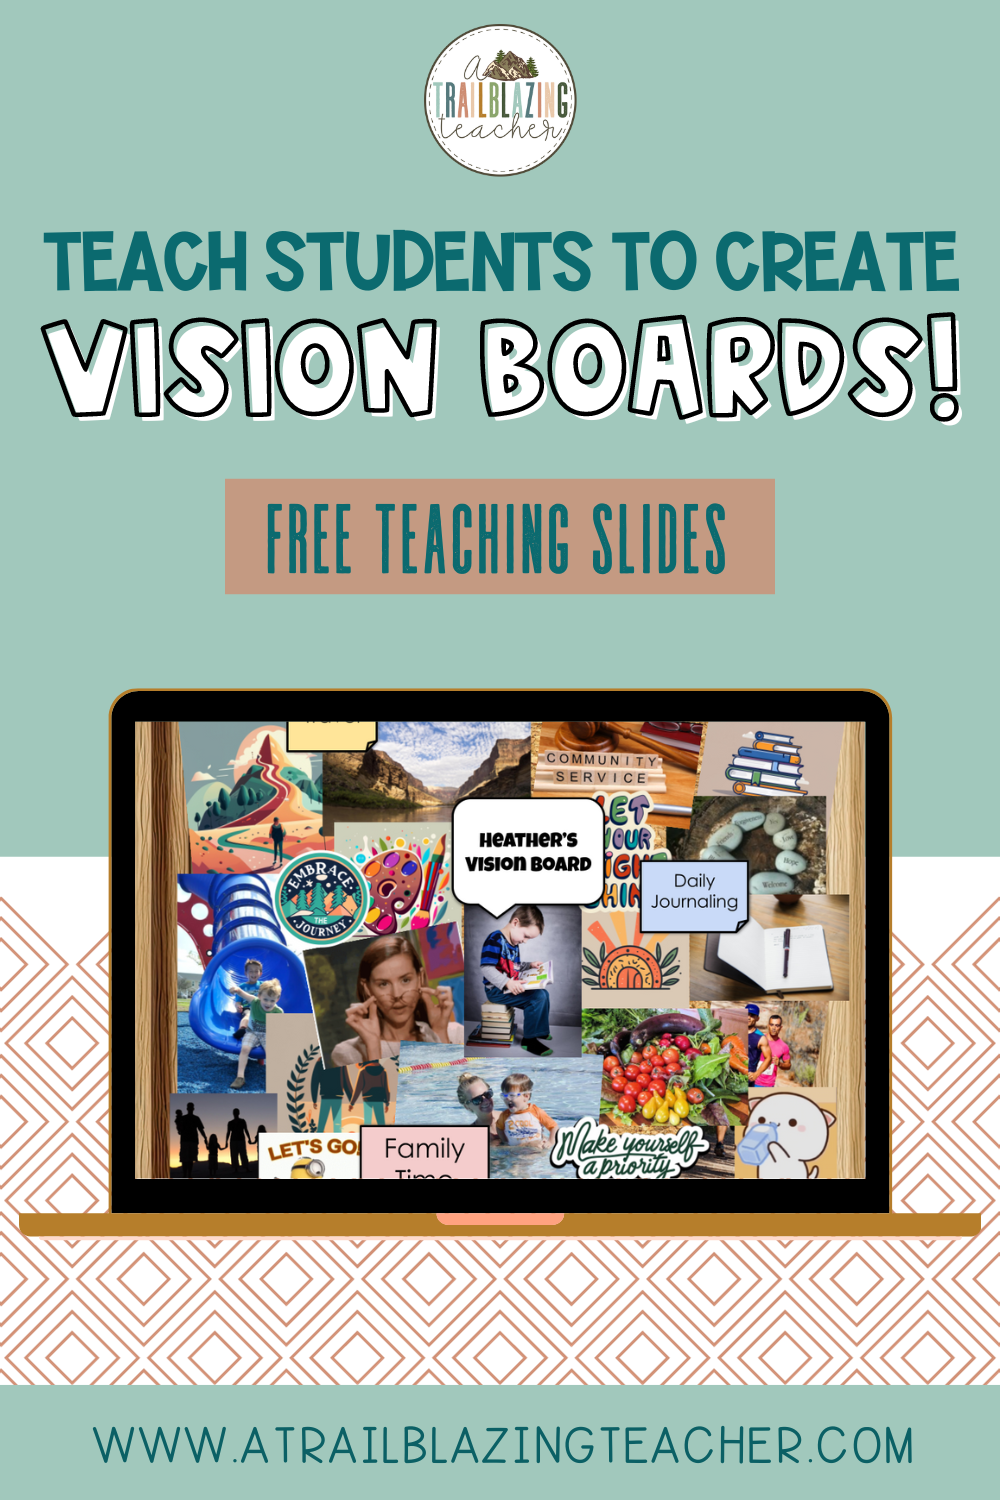 Crafting Dreams into Plans: A New Year’s Vision Board for Students